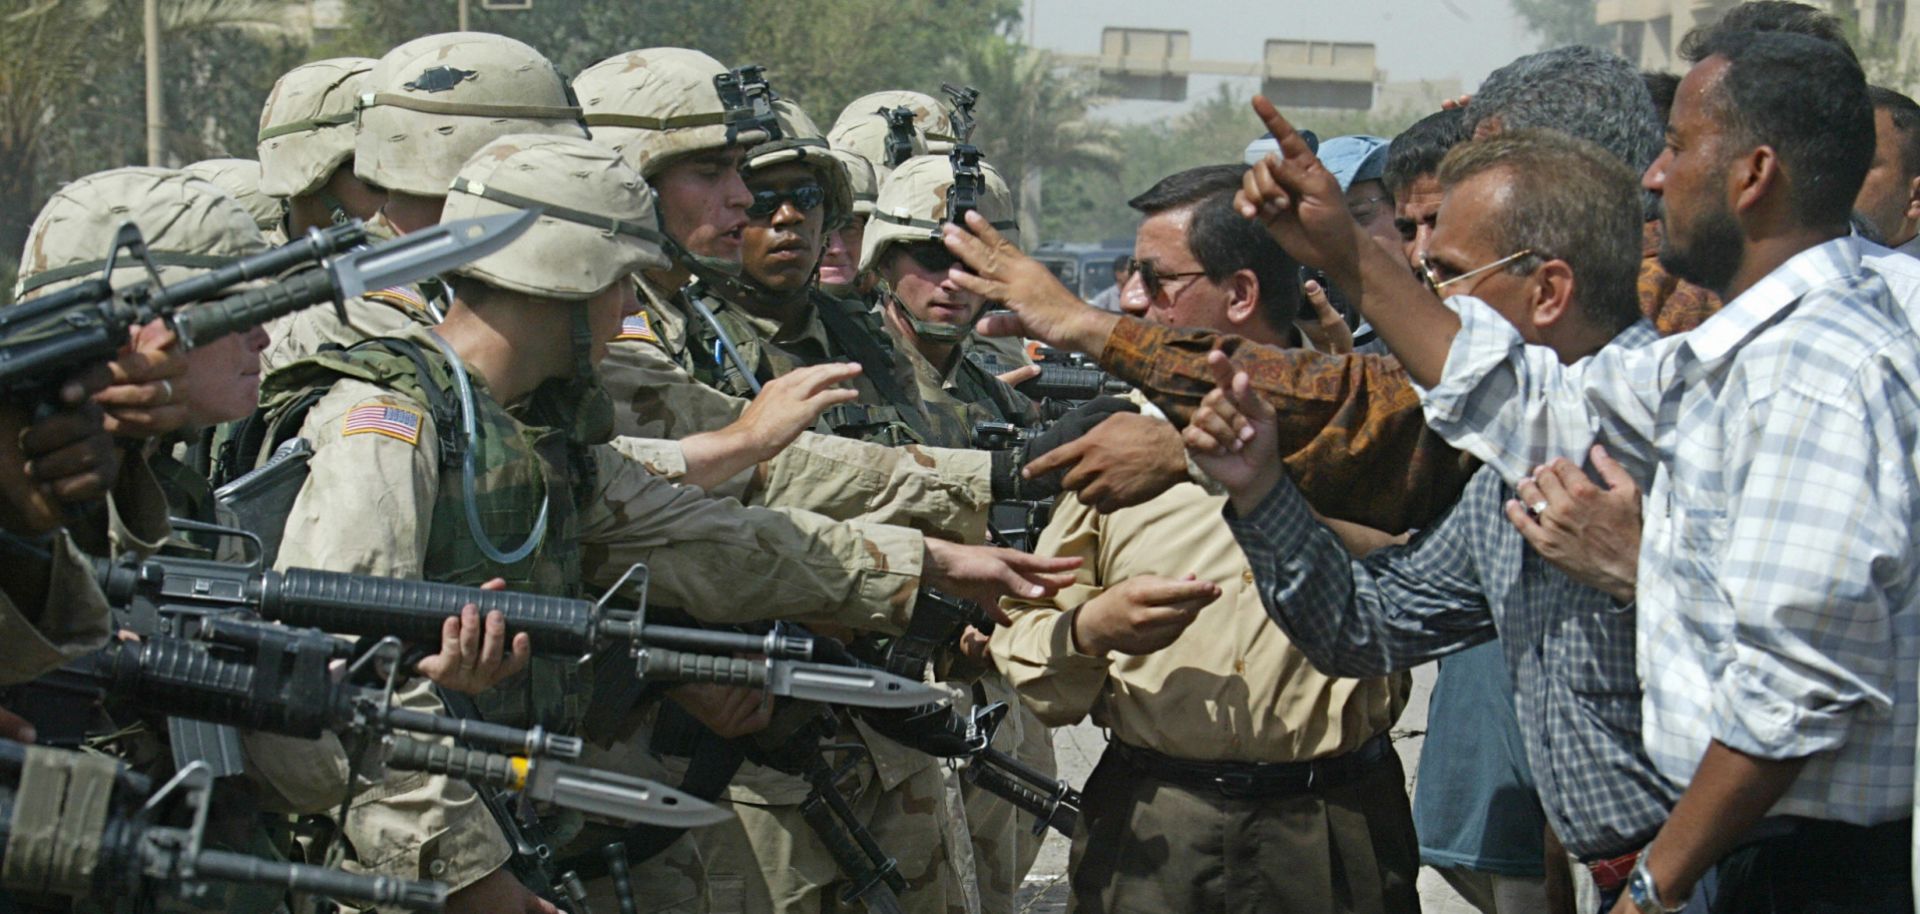 U.S. troops guard the entrance of the U.S. administration's offices in Baghdad as ex-Iraqi army personnel stage a protest, June 18, 2003. 